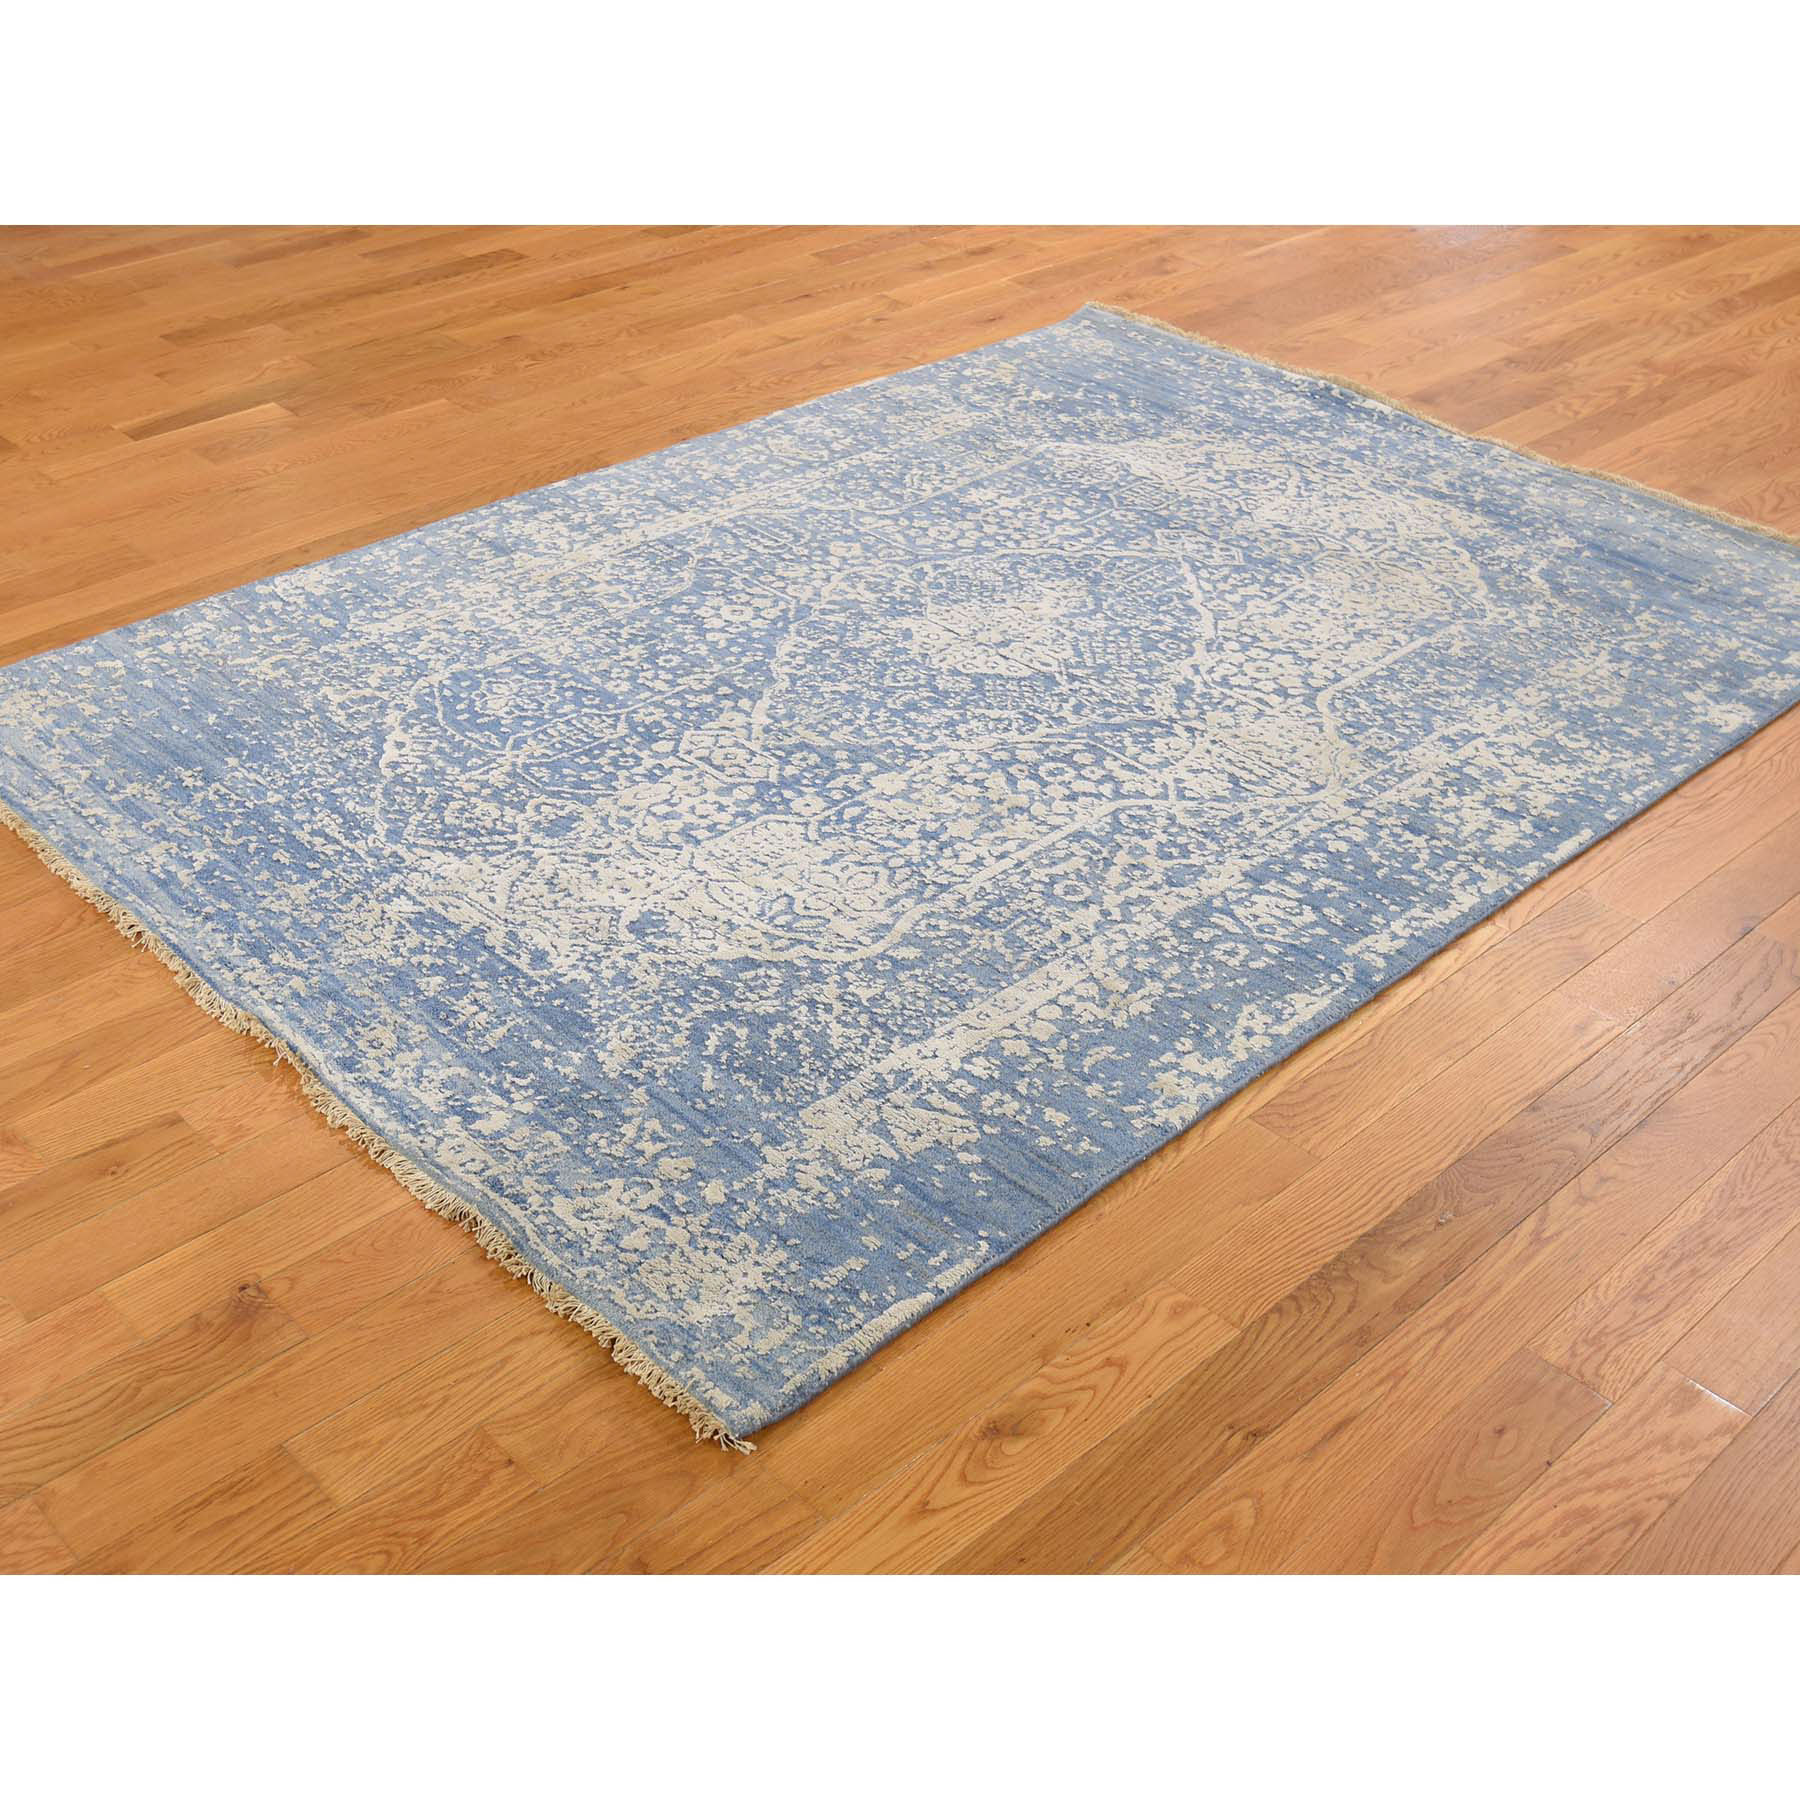 5-1--x7- Denim Blue Wool and Pure Silk Hand-Knotted Broken Persian Design Rug 